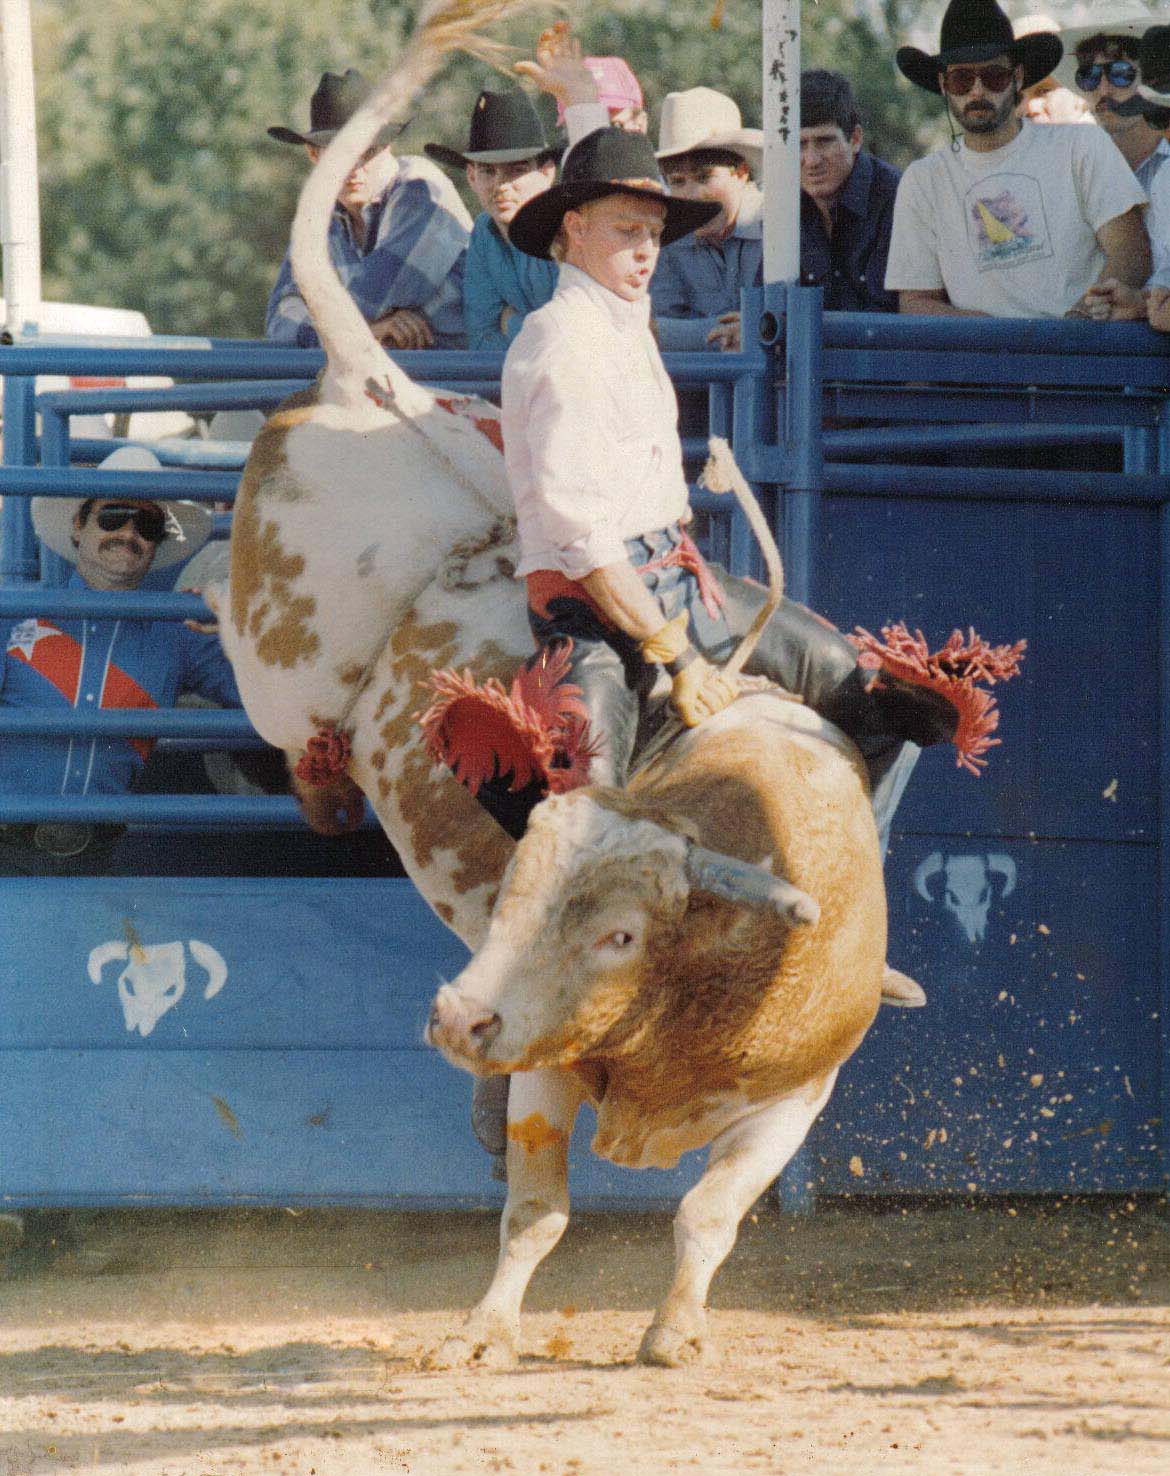 bull riding12 Little Boy Dreams About Pro Bull Rider